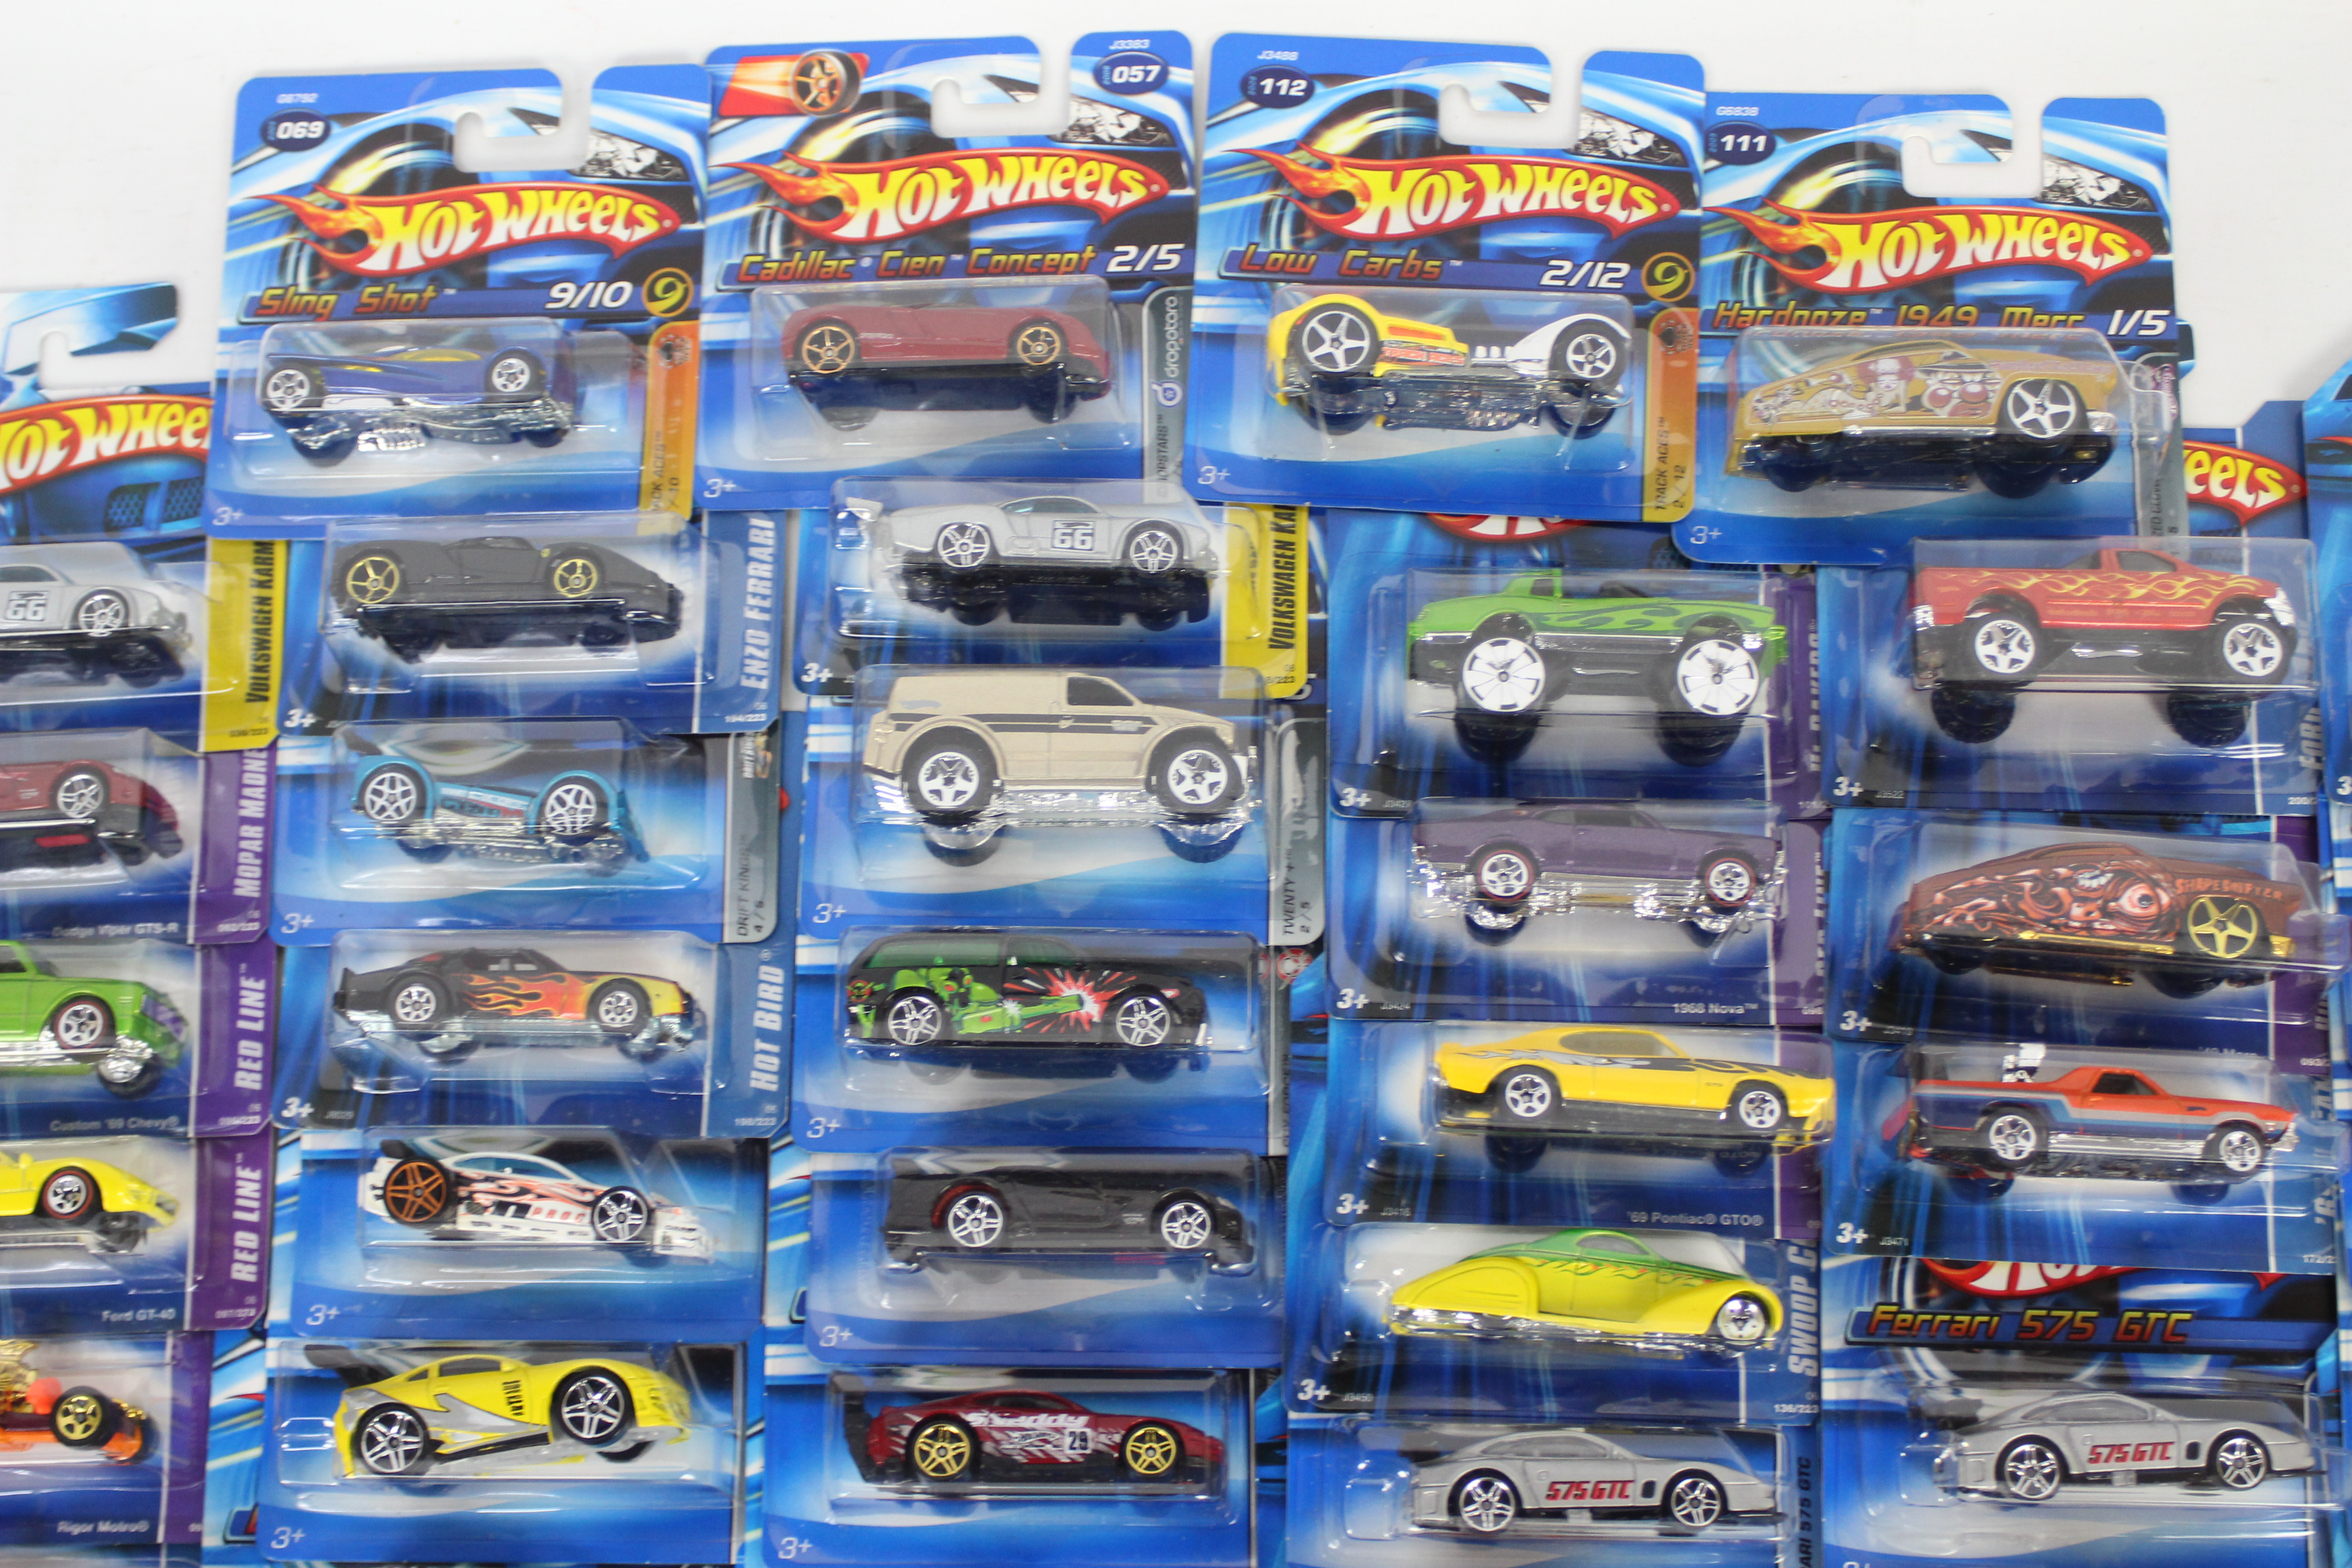 Hot Wheels - 50 x unopened carded vehicles from 2006/7 including Ford GT-40 # J3423, - Image 4 of 4